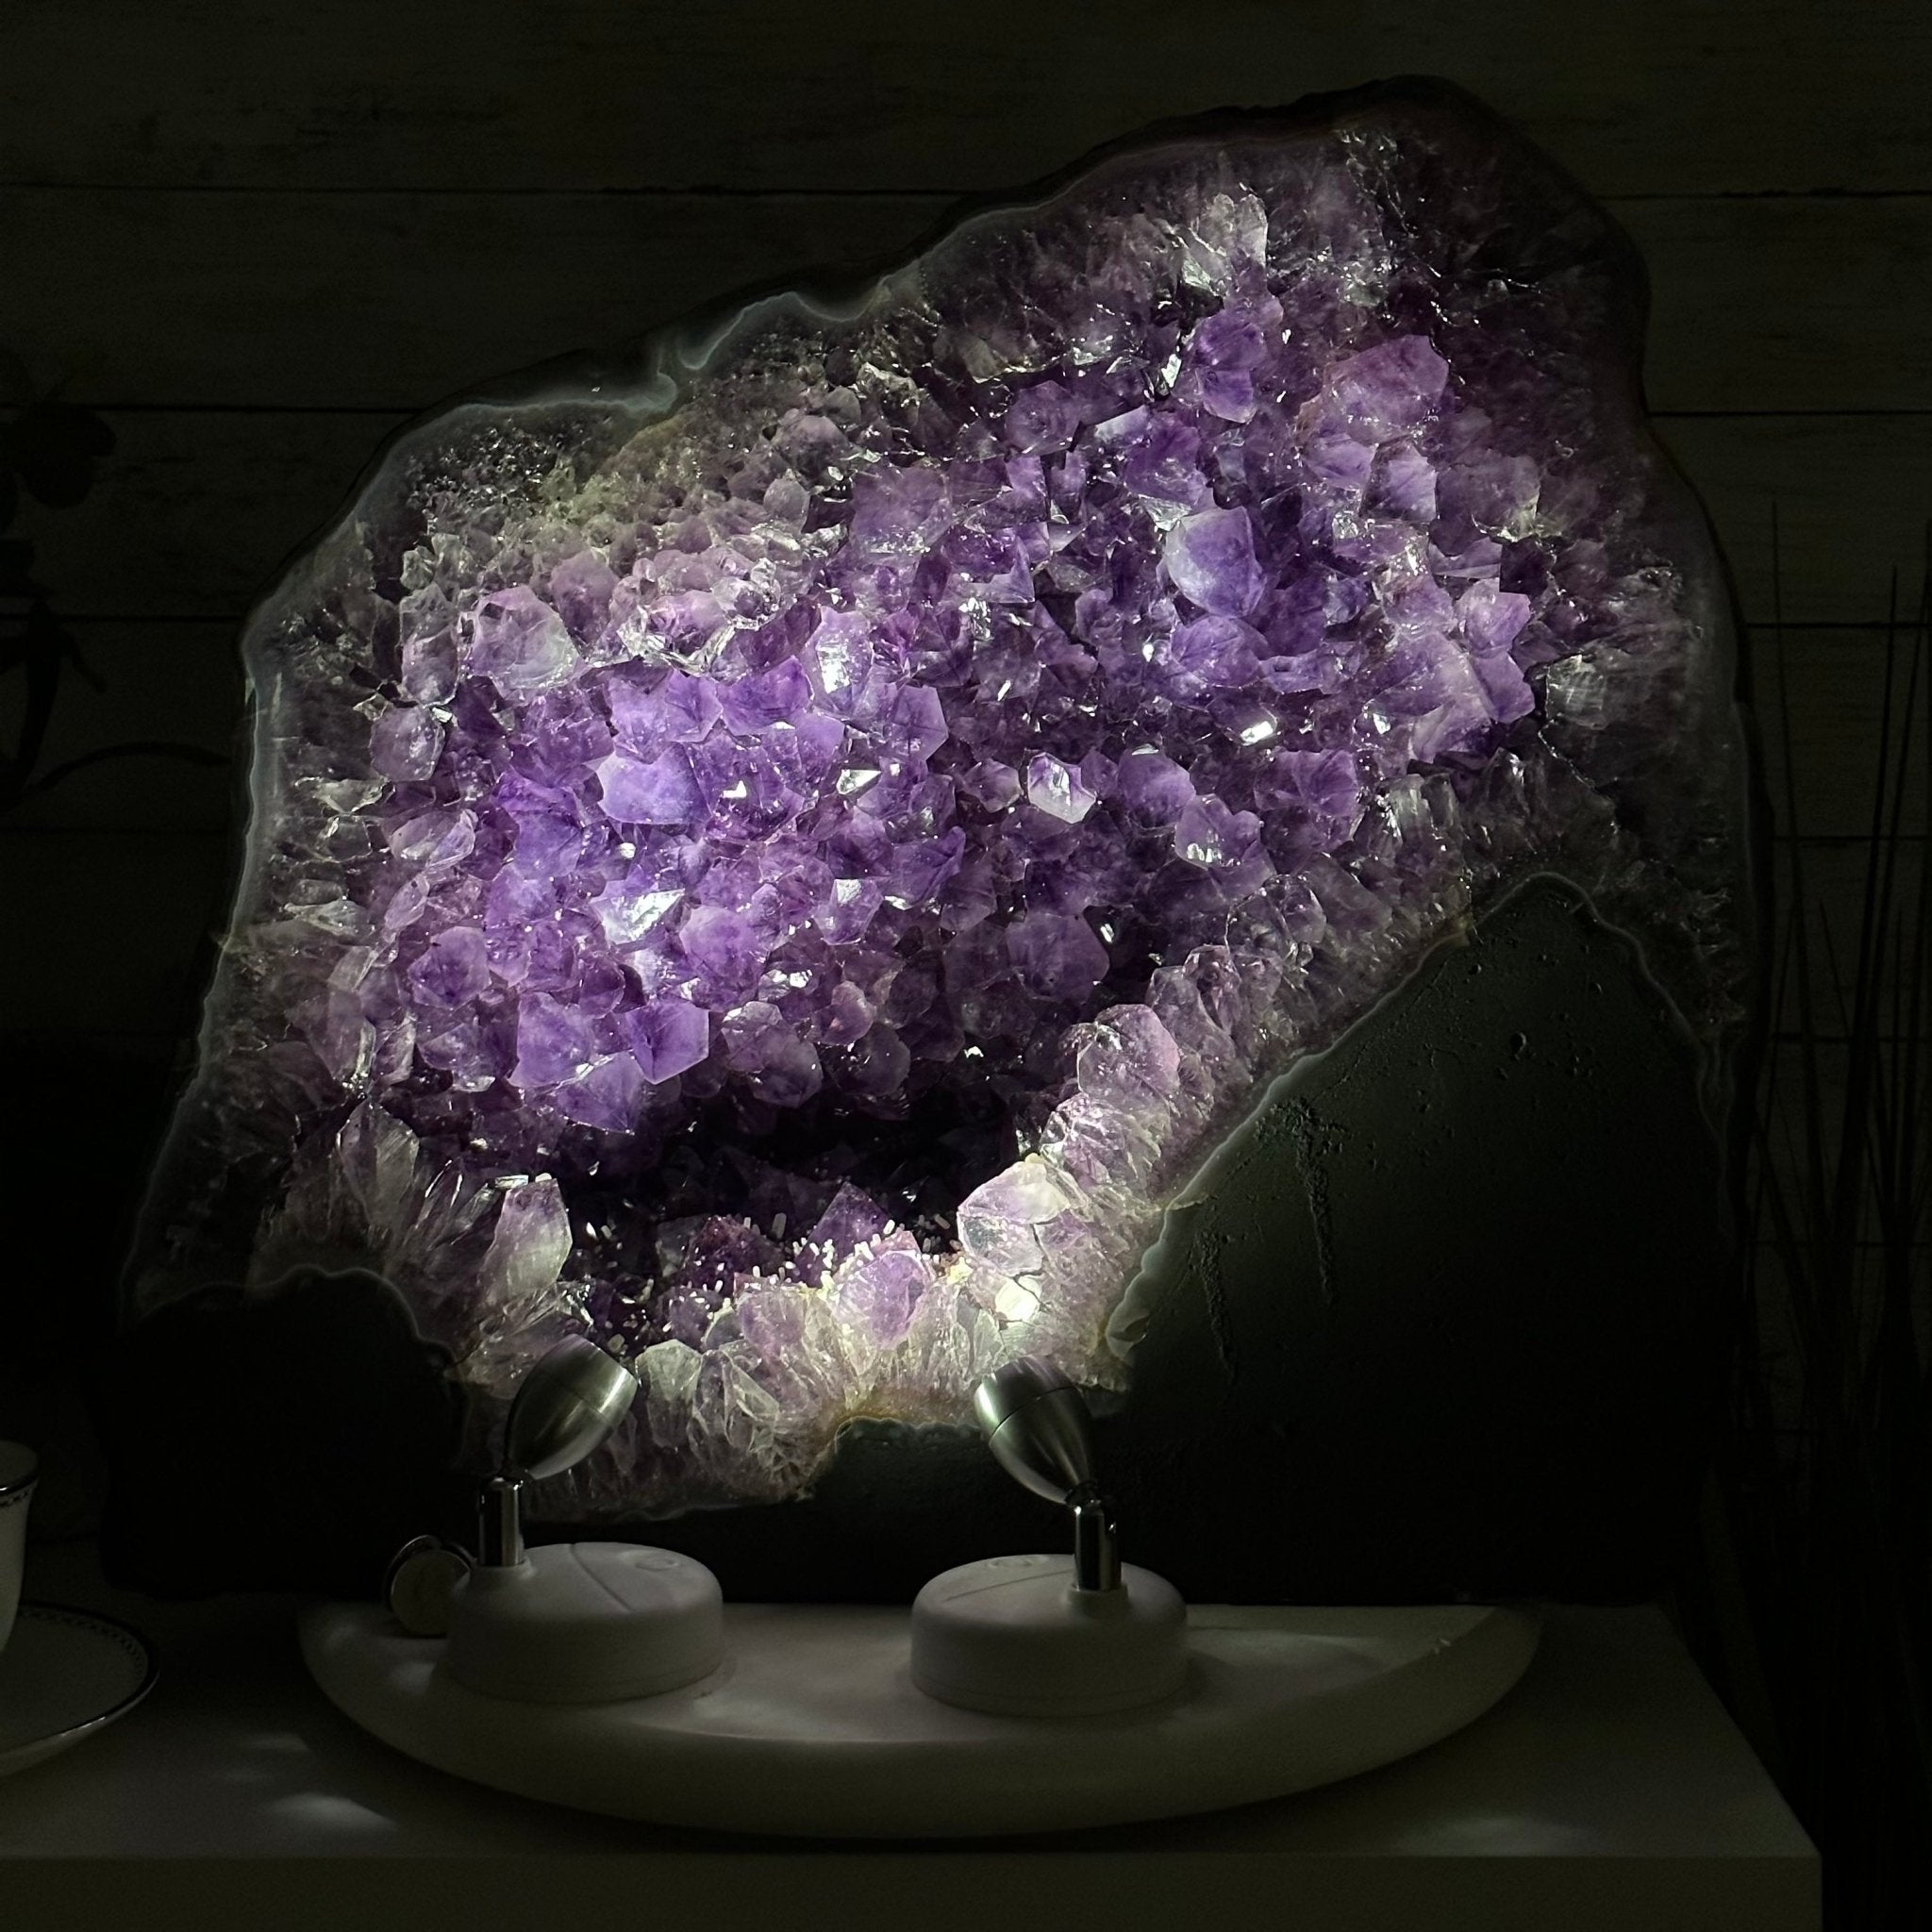 Super Quality Brazilian Amethyst Cathedral, 98.2 lbs & 17.4" Tall, Model #5601-1182 by Brazil Gems - Brazil GemsBrazil GemsSuper Quality Brazilian Amethyst Cathedral, 98.2 lbs & 17.4" Tall, Model #5601-1182 by Brazil GemsCathedrals5601-1182